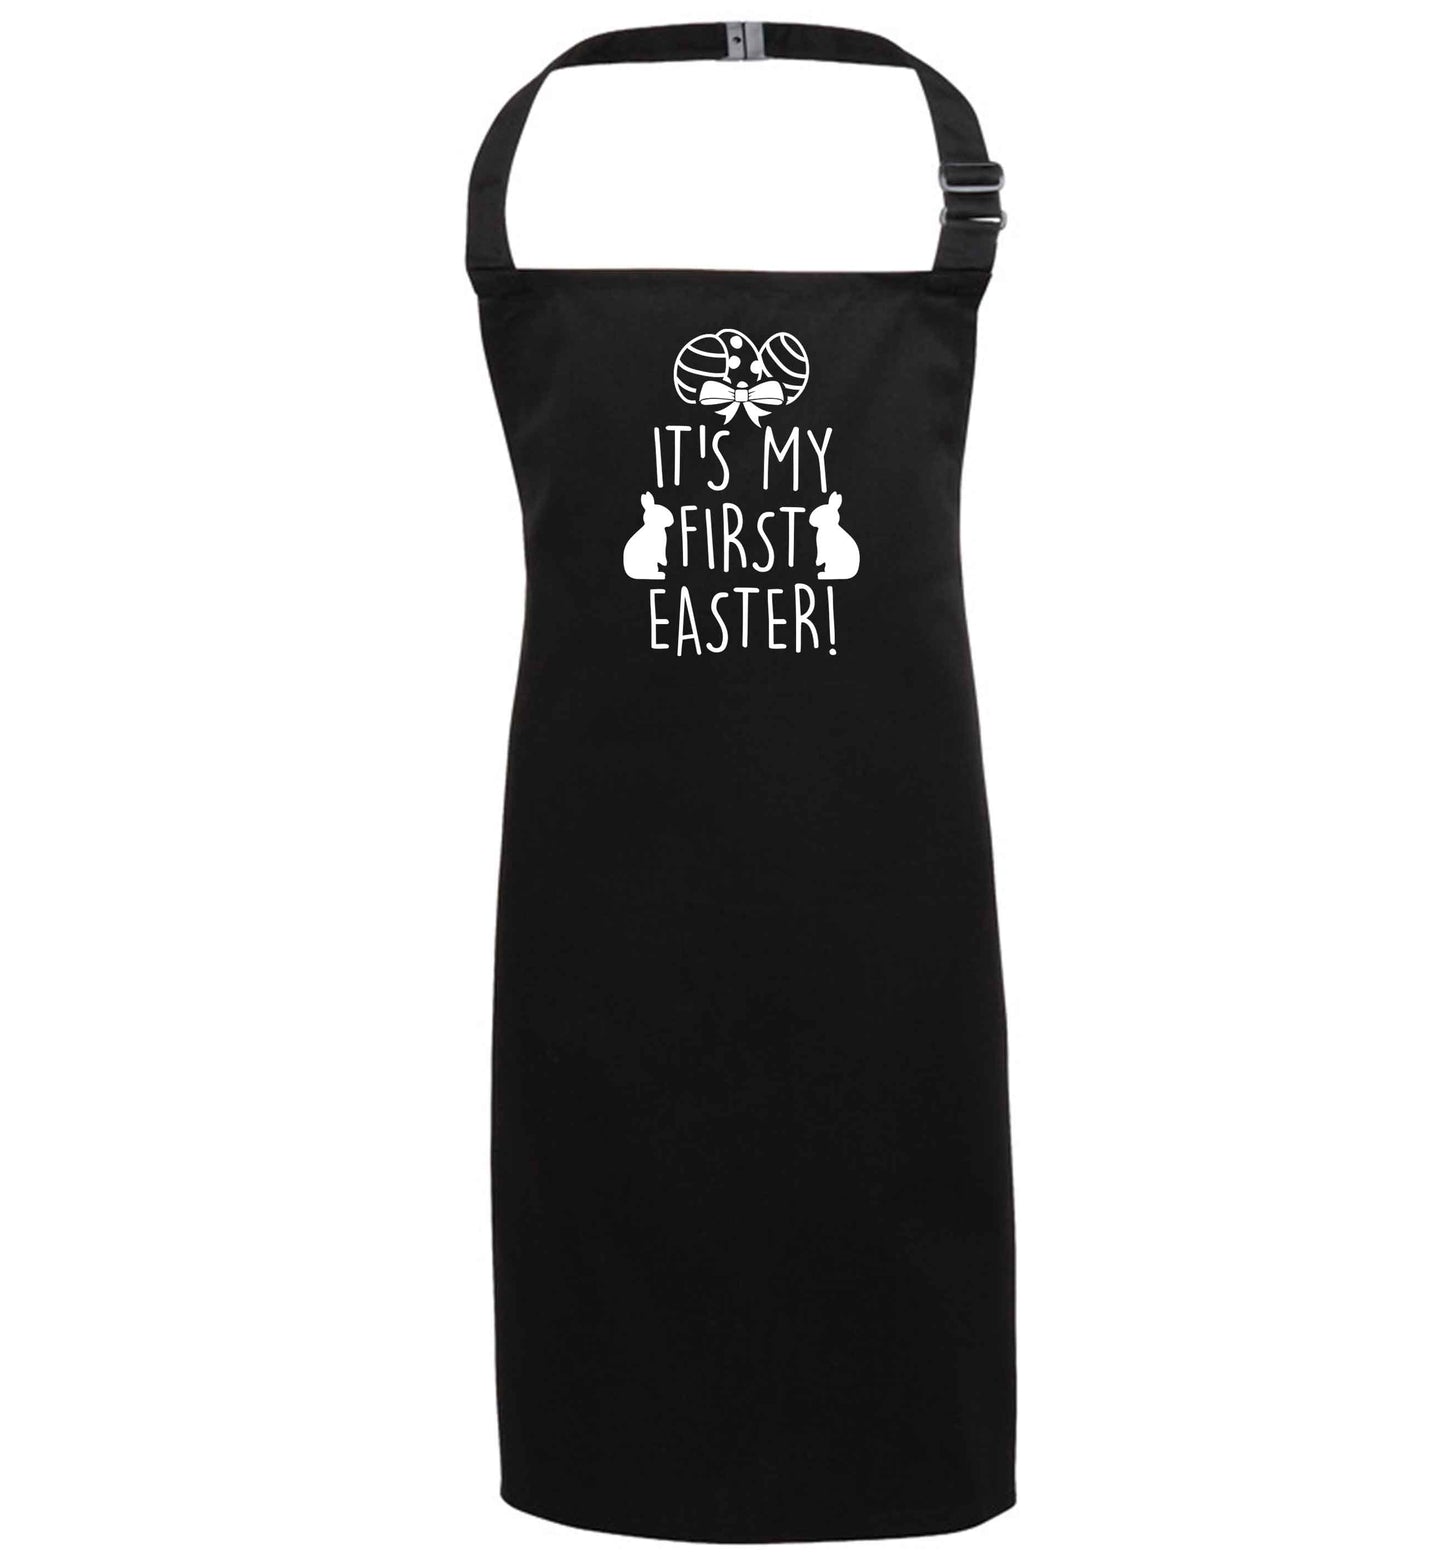 It's my first Easter black apron 7-10 years